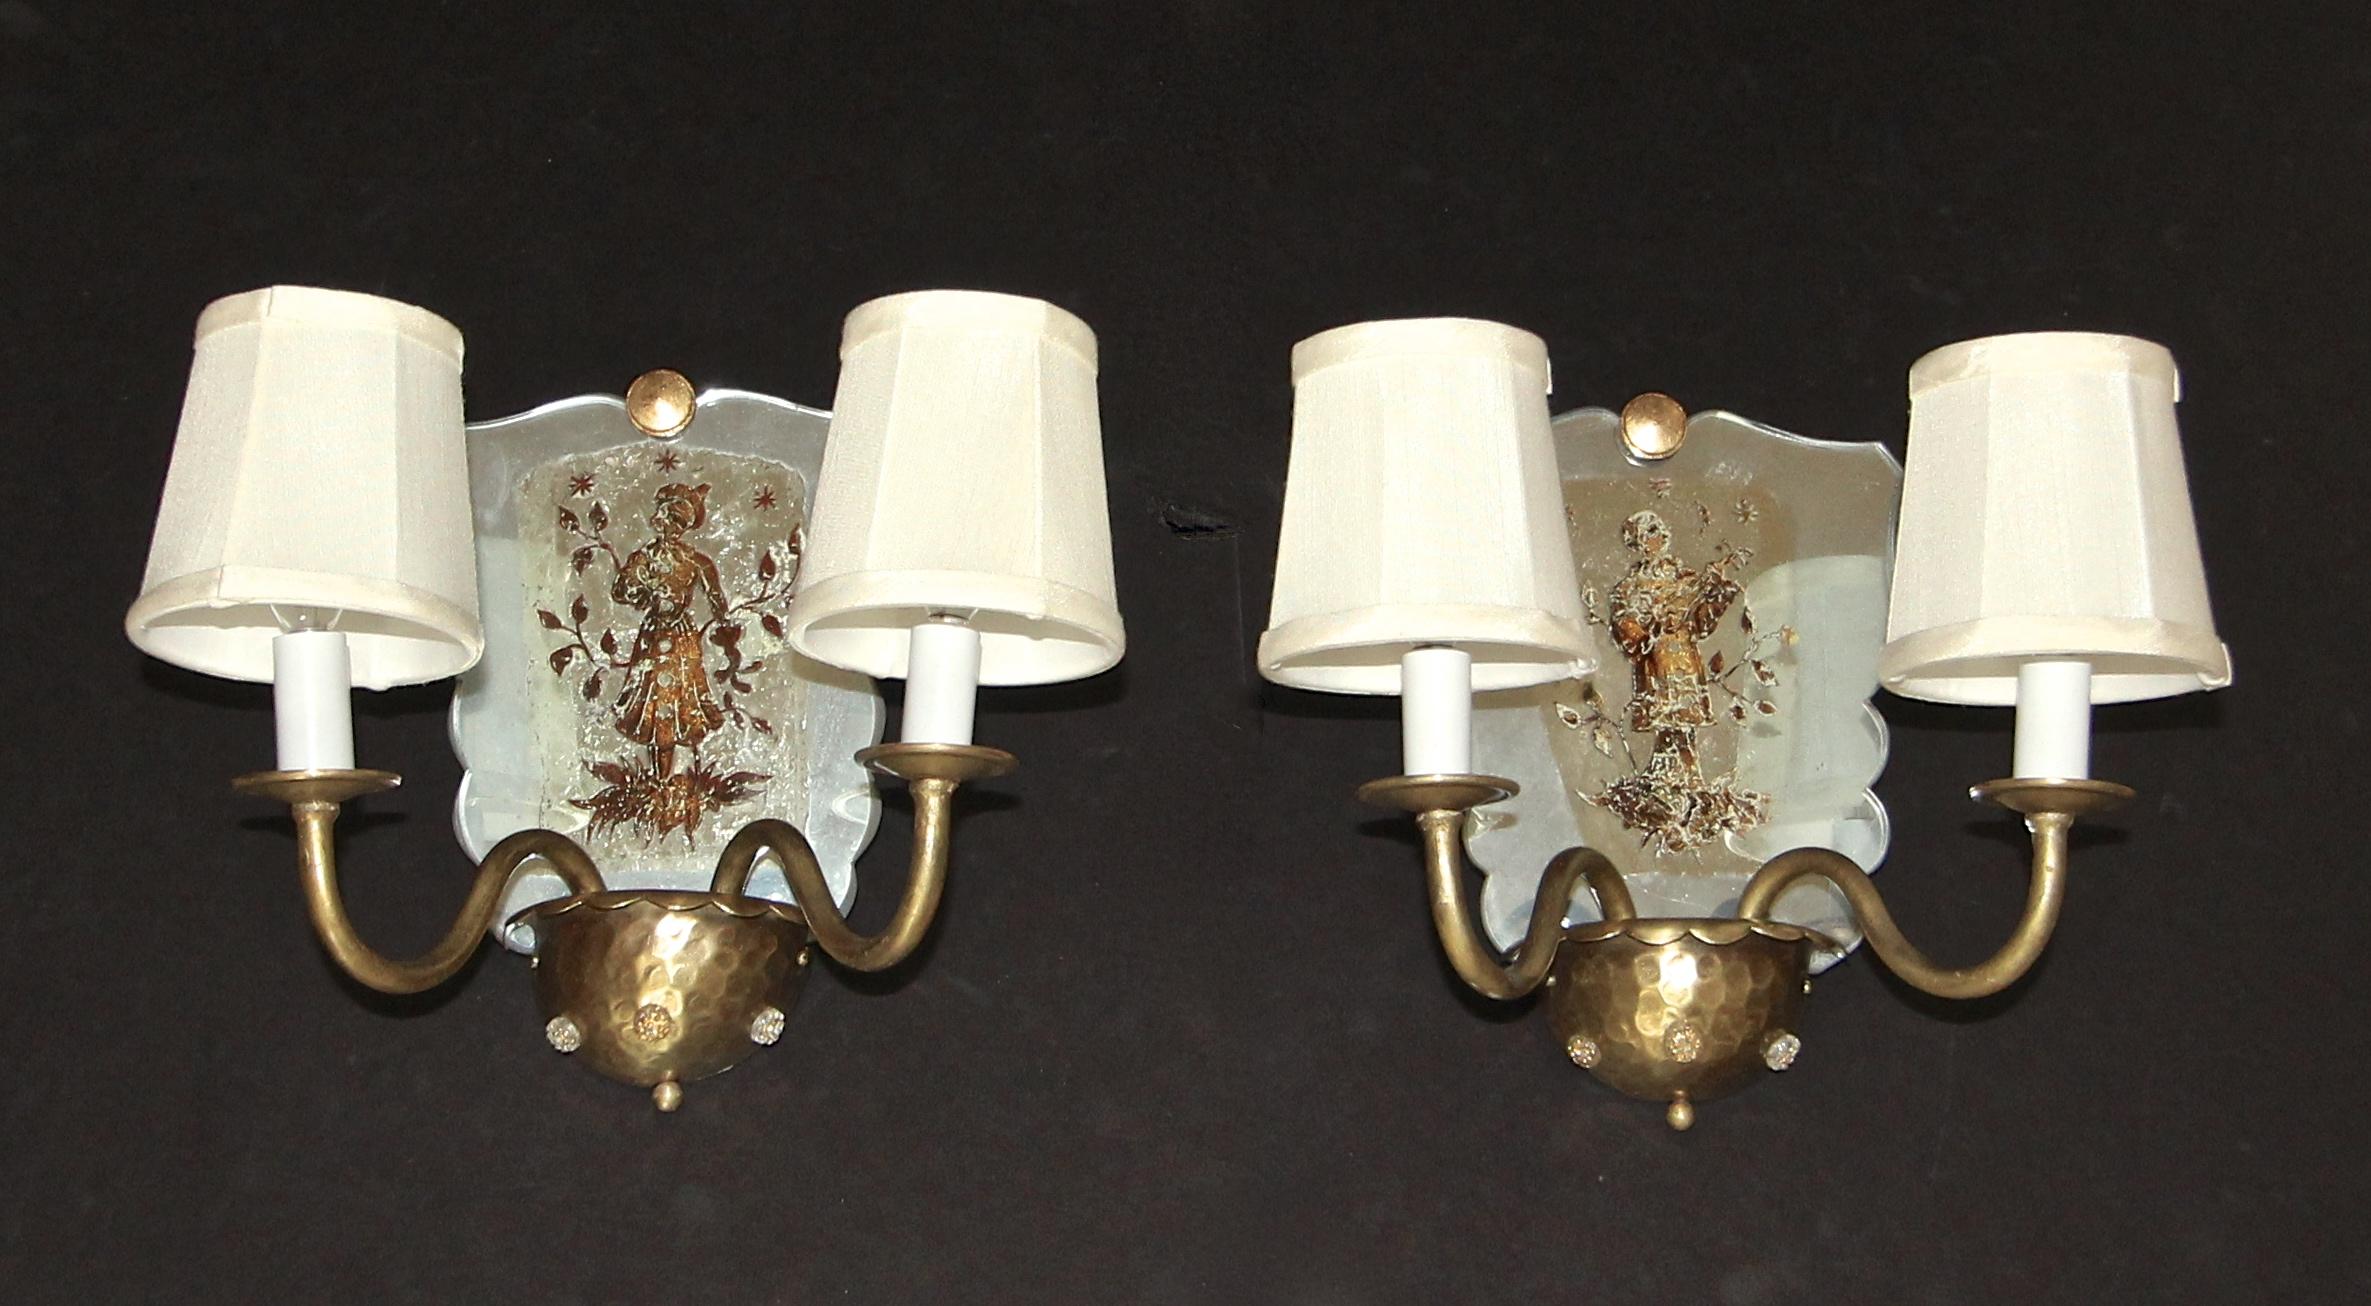 Pair of Venetian Italian Mirrored Wall Light Sconces For Sale 12